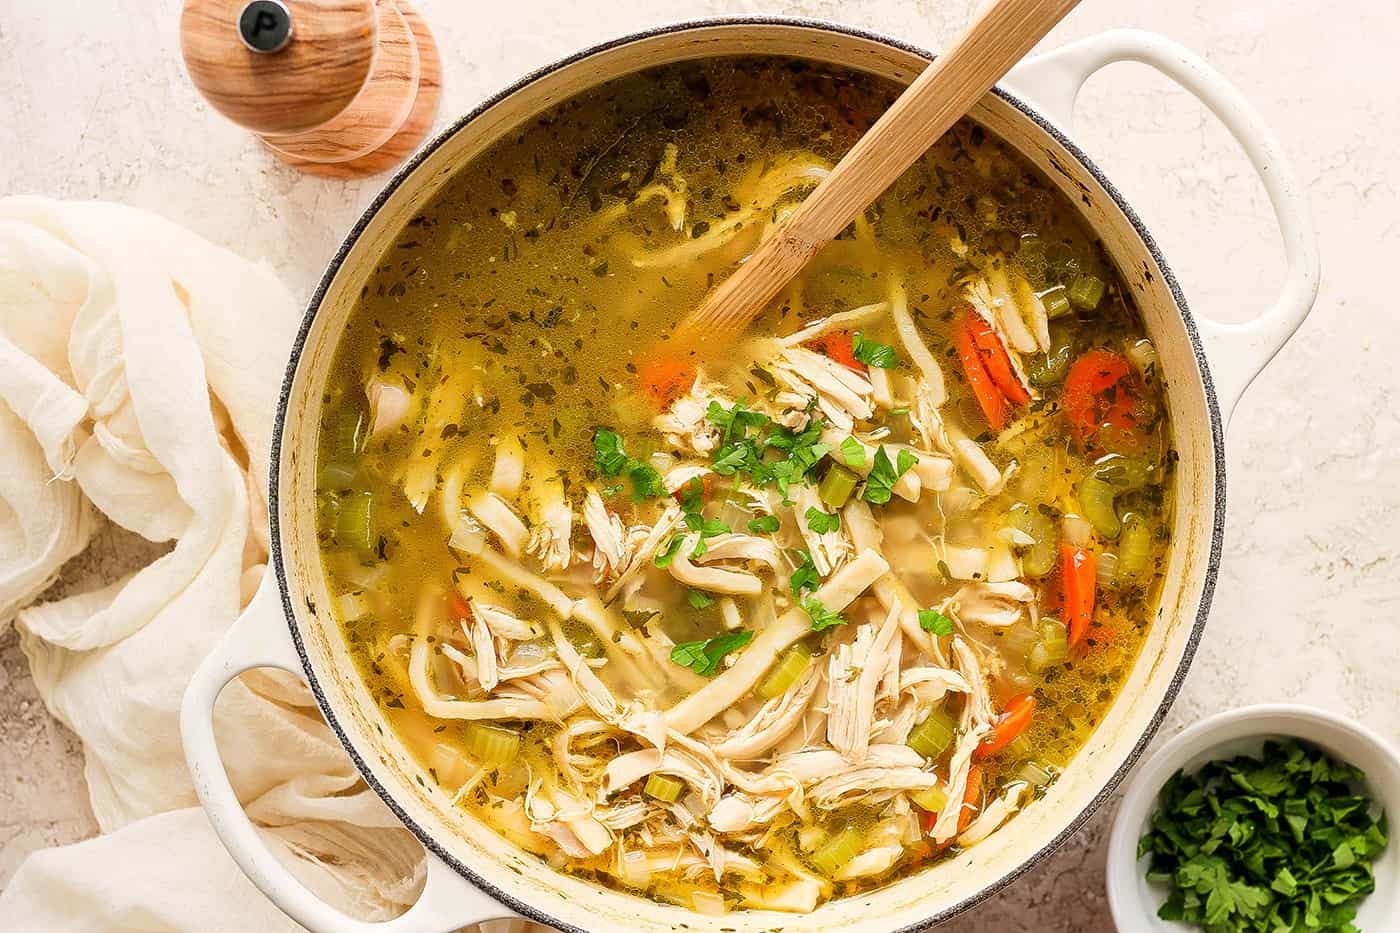 Shredded chicken, herbs and carrots are shown being stirred in a pot of chicken noodle soup.